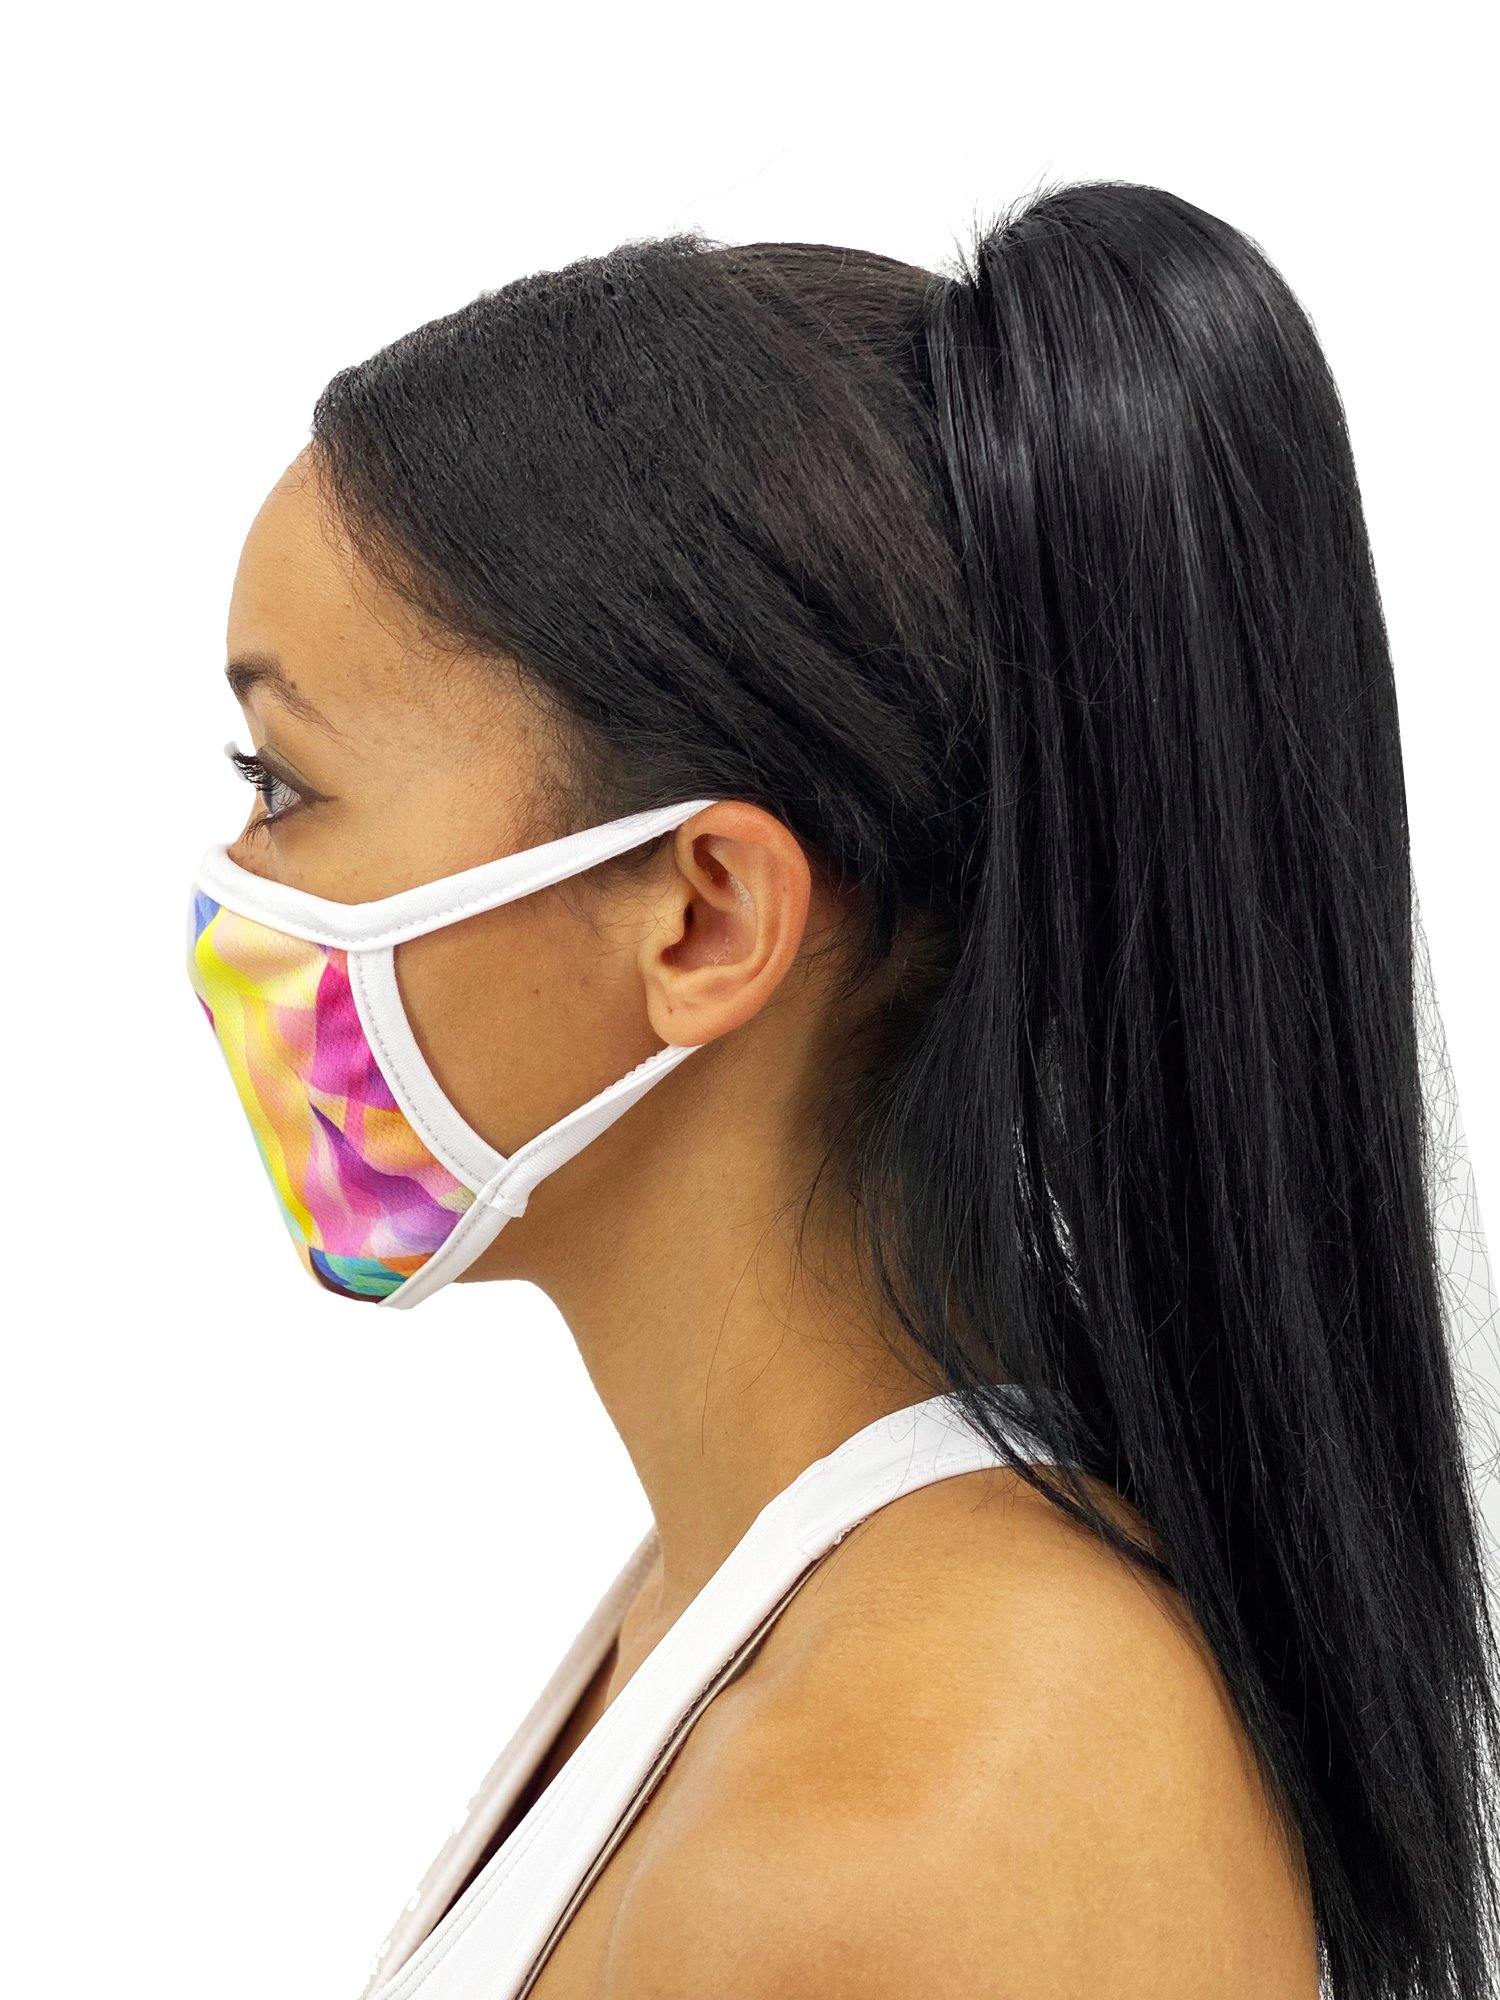 Rainbow Prism Face Mask With Filter Pocket - USA Made Dropship